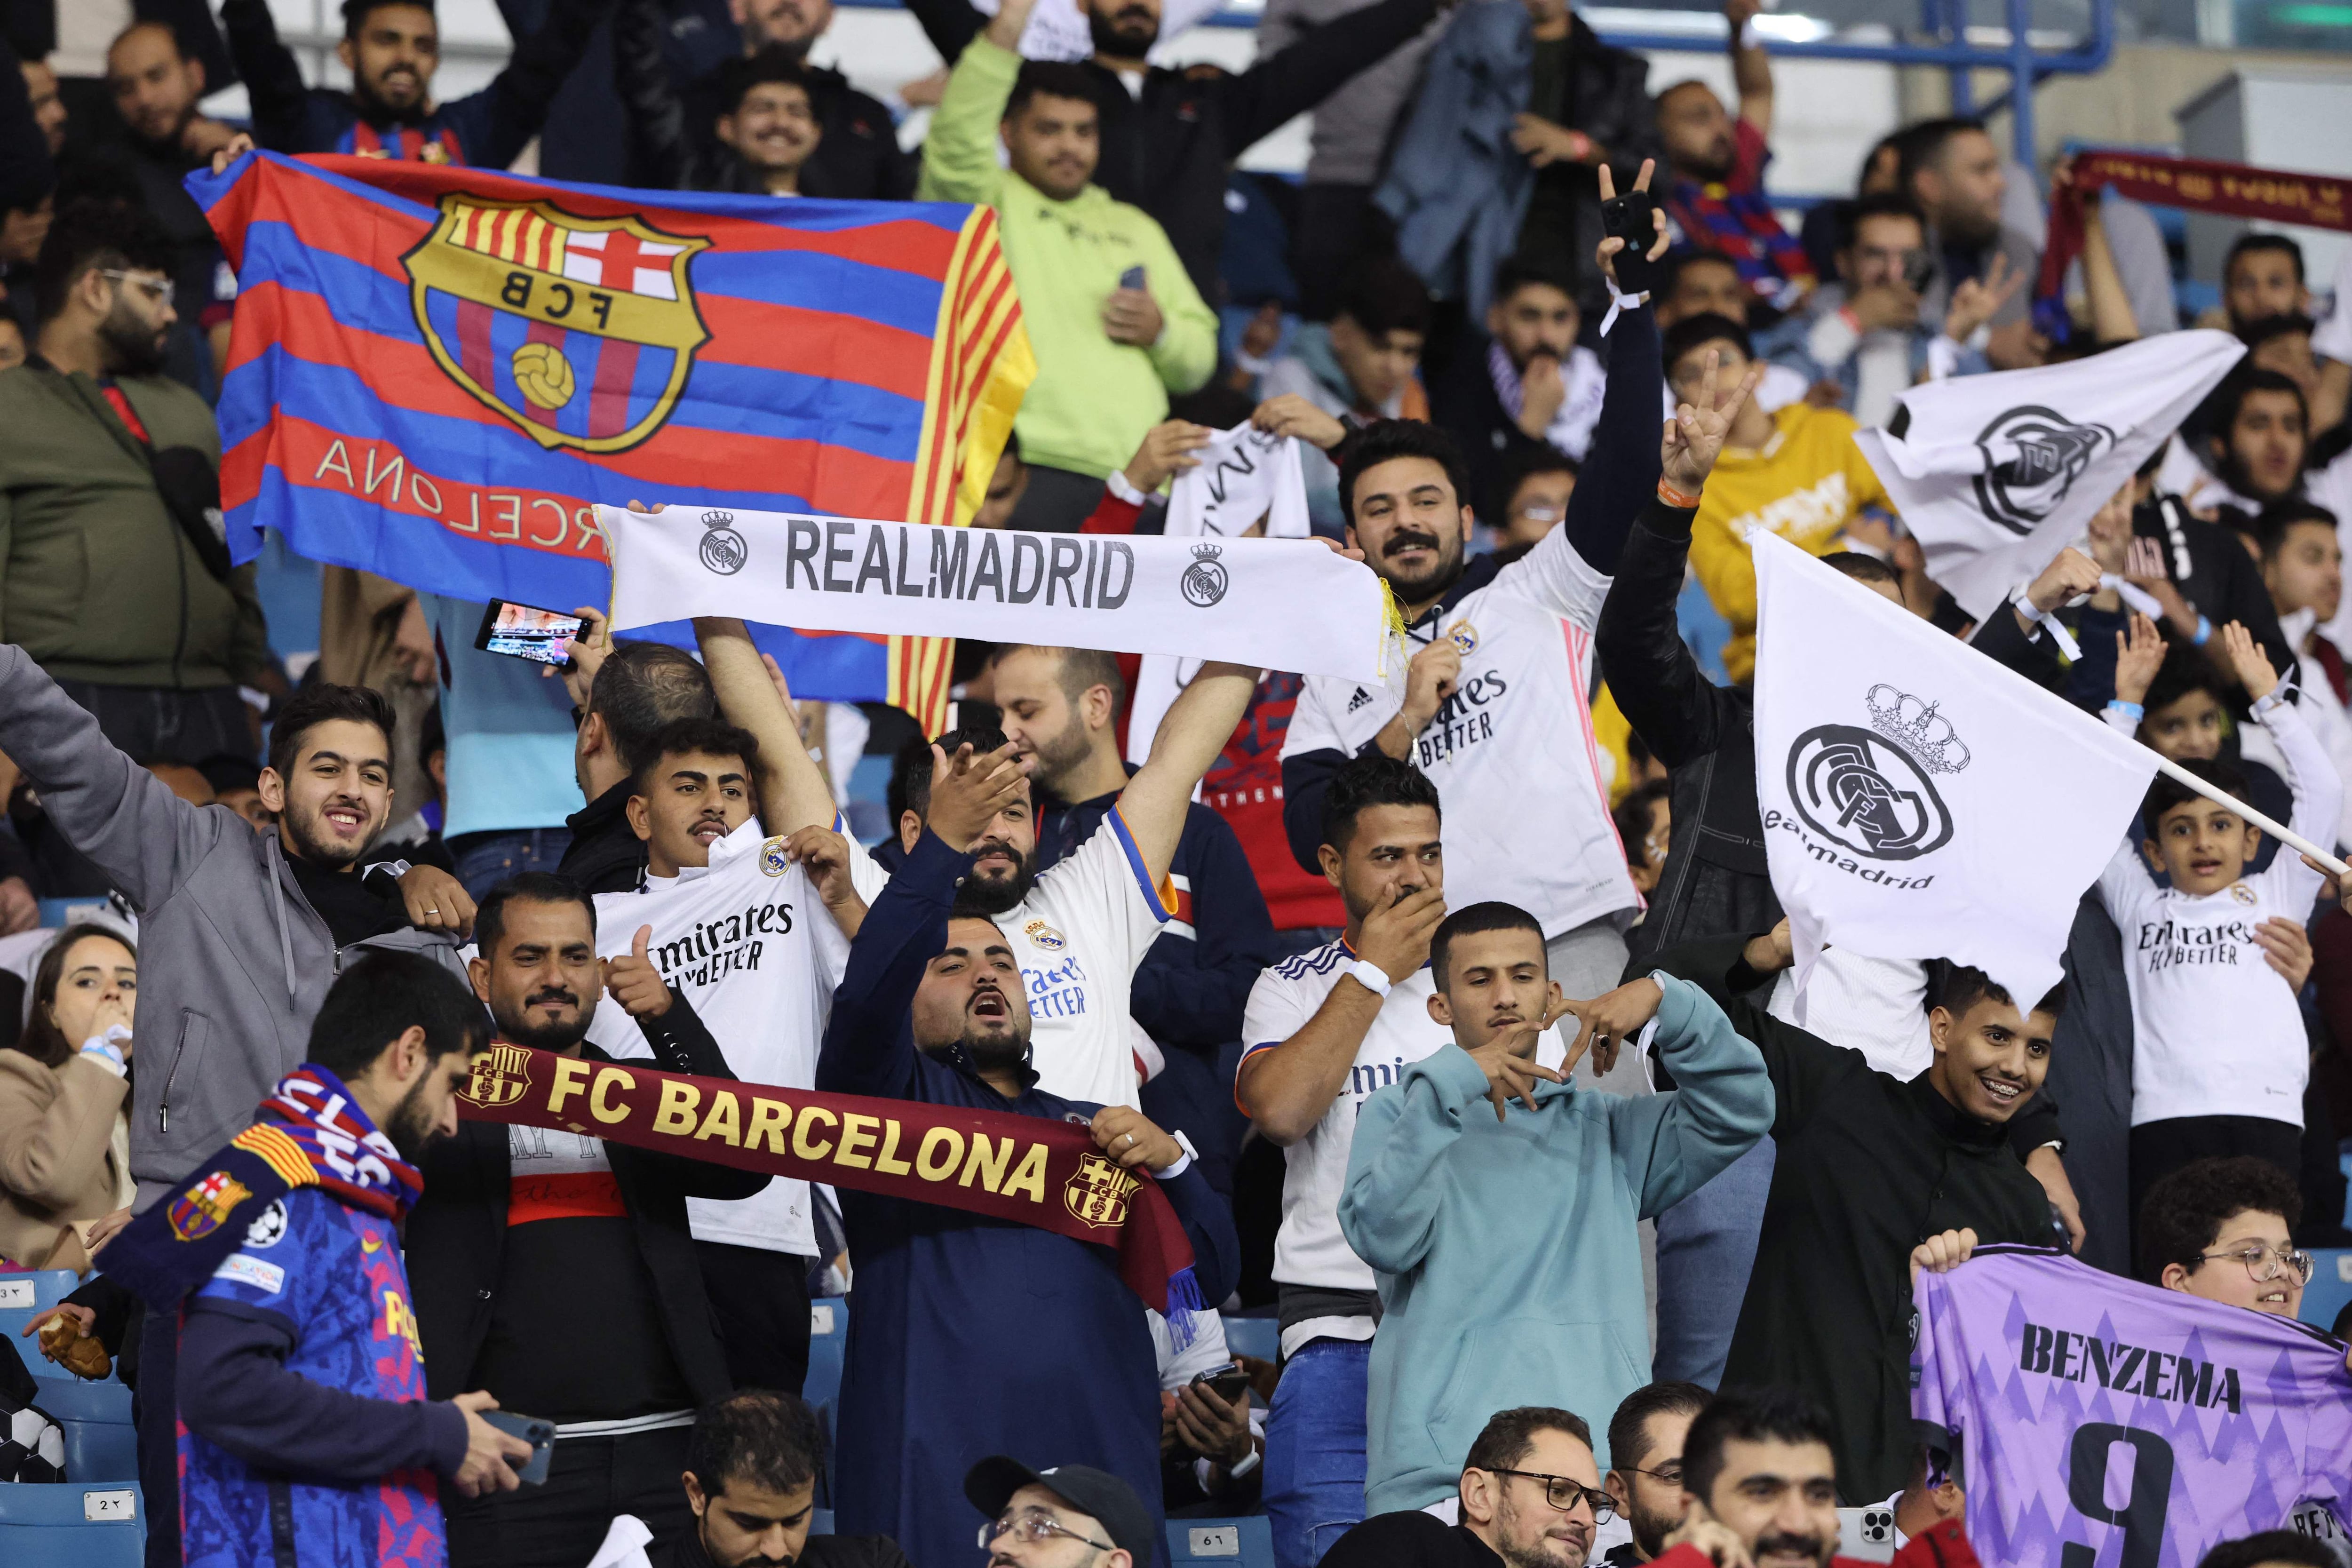 Supporters cheer before the start of the Spanish Super Cup final football match between Real Madrid CF and FC Barcelona at the King Fahd International Stadium in Riyadh, Saudi Arabia, on January 15, 2023. (Photo by Giuseppe CACACE / AFP)